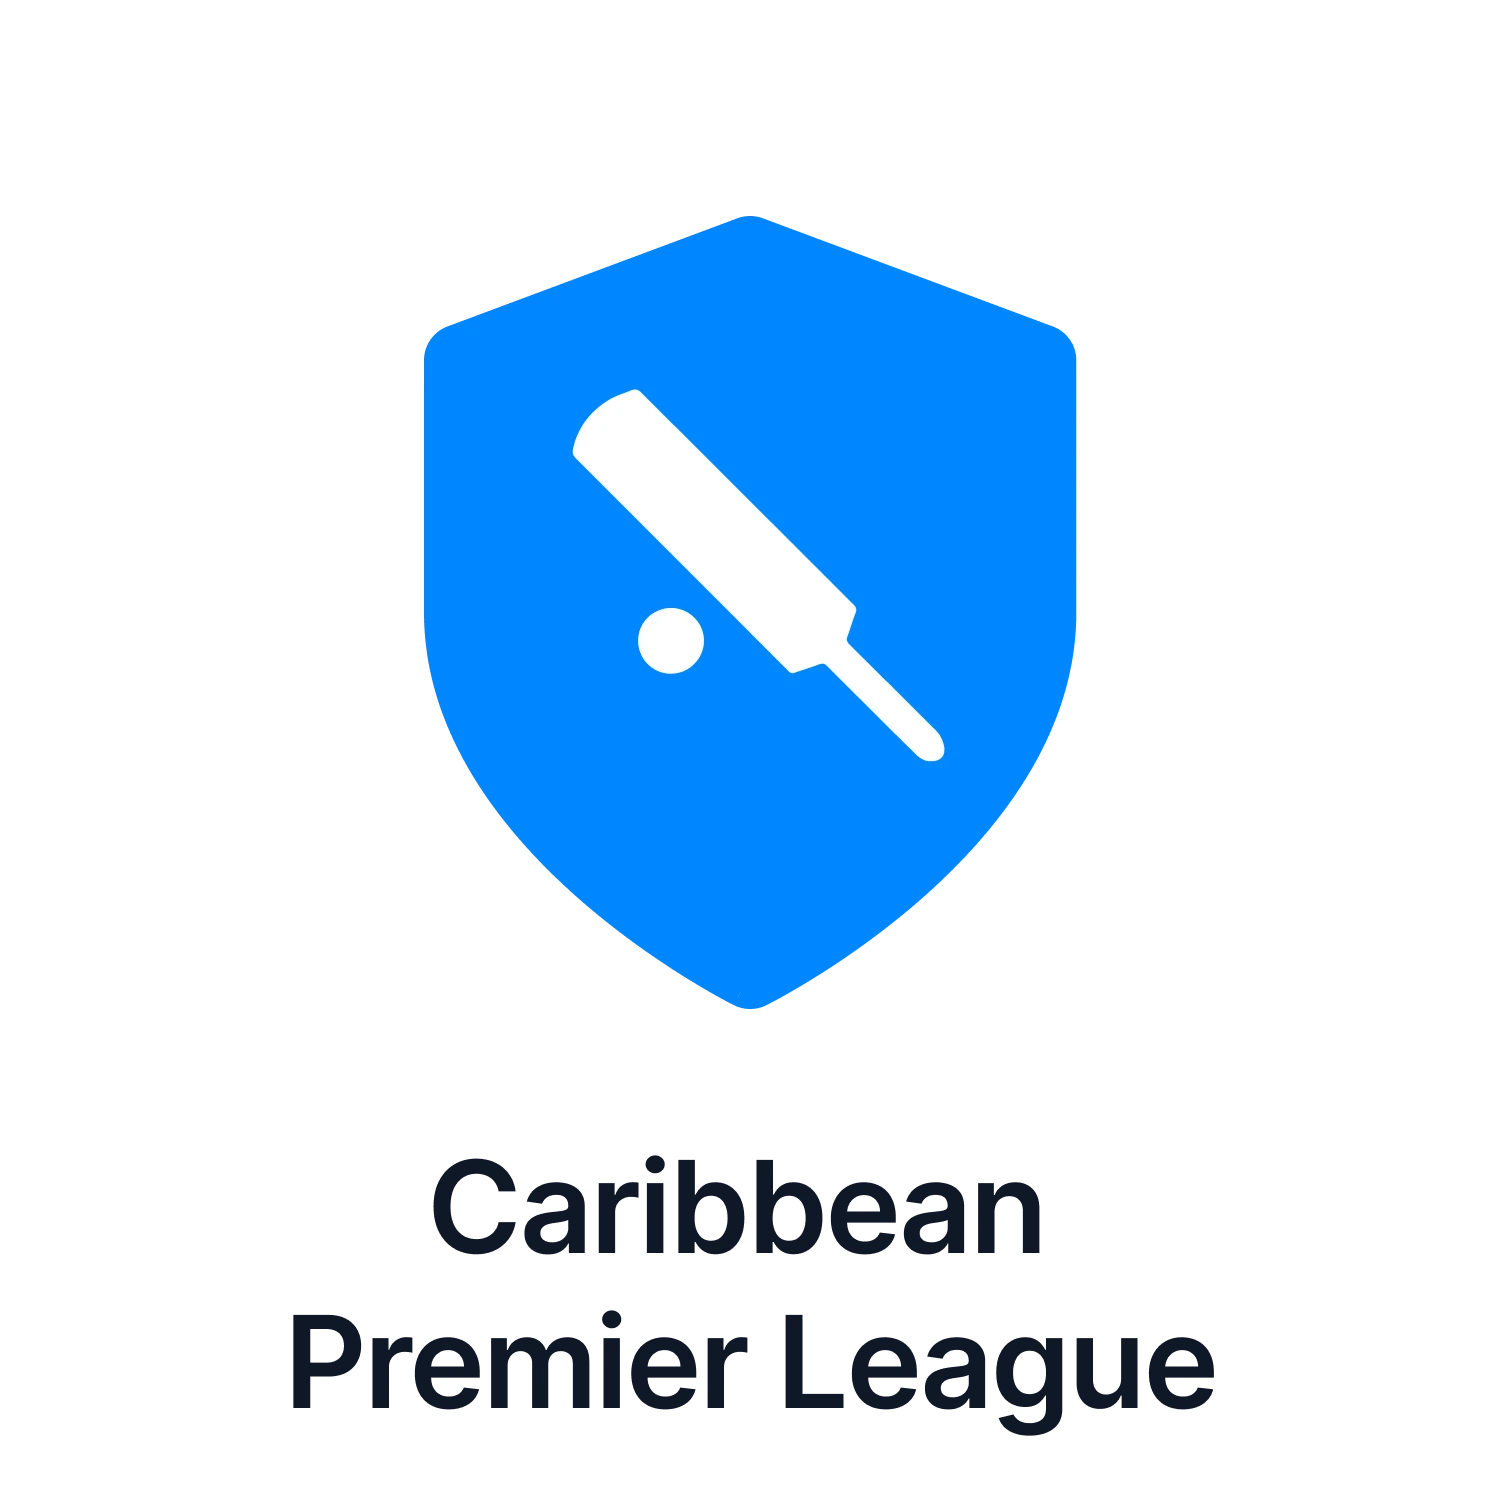 Check the odds of the Caribbean Premier League on our site.